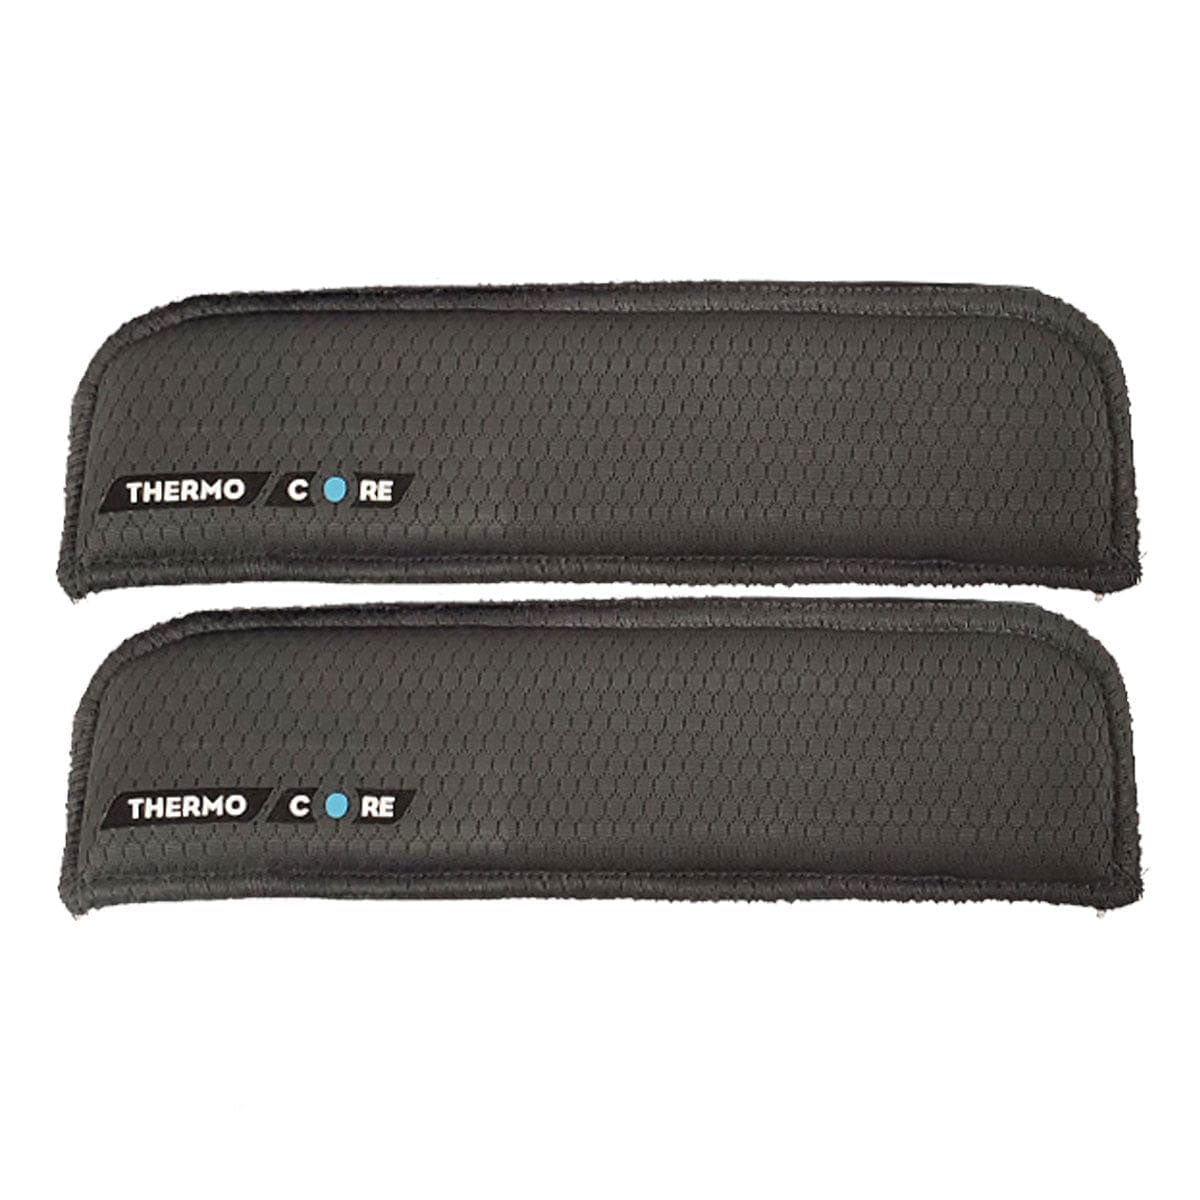 Bauer Thermocore Goalie Sweat Band (2 Pack) - The Hockey Shop Source For Sports